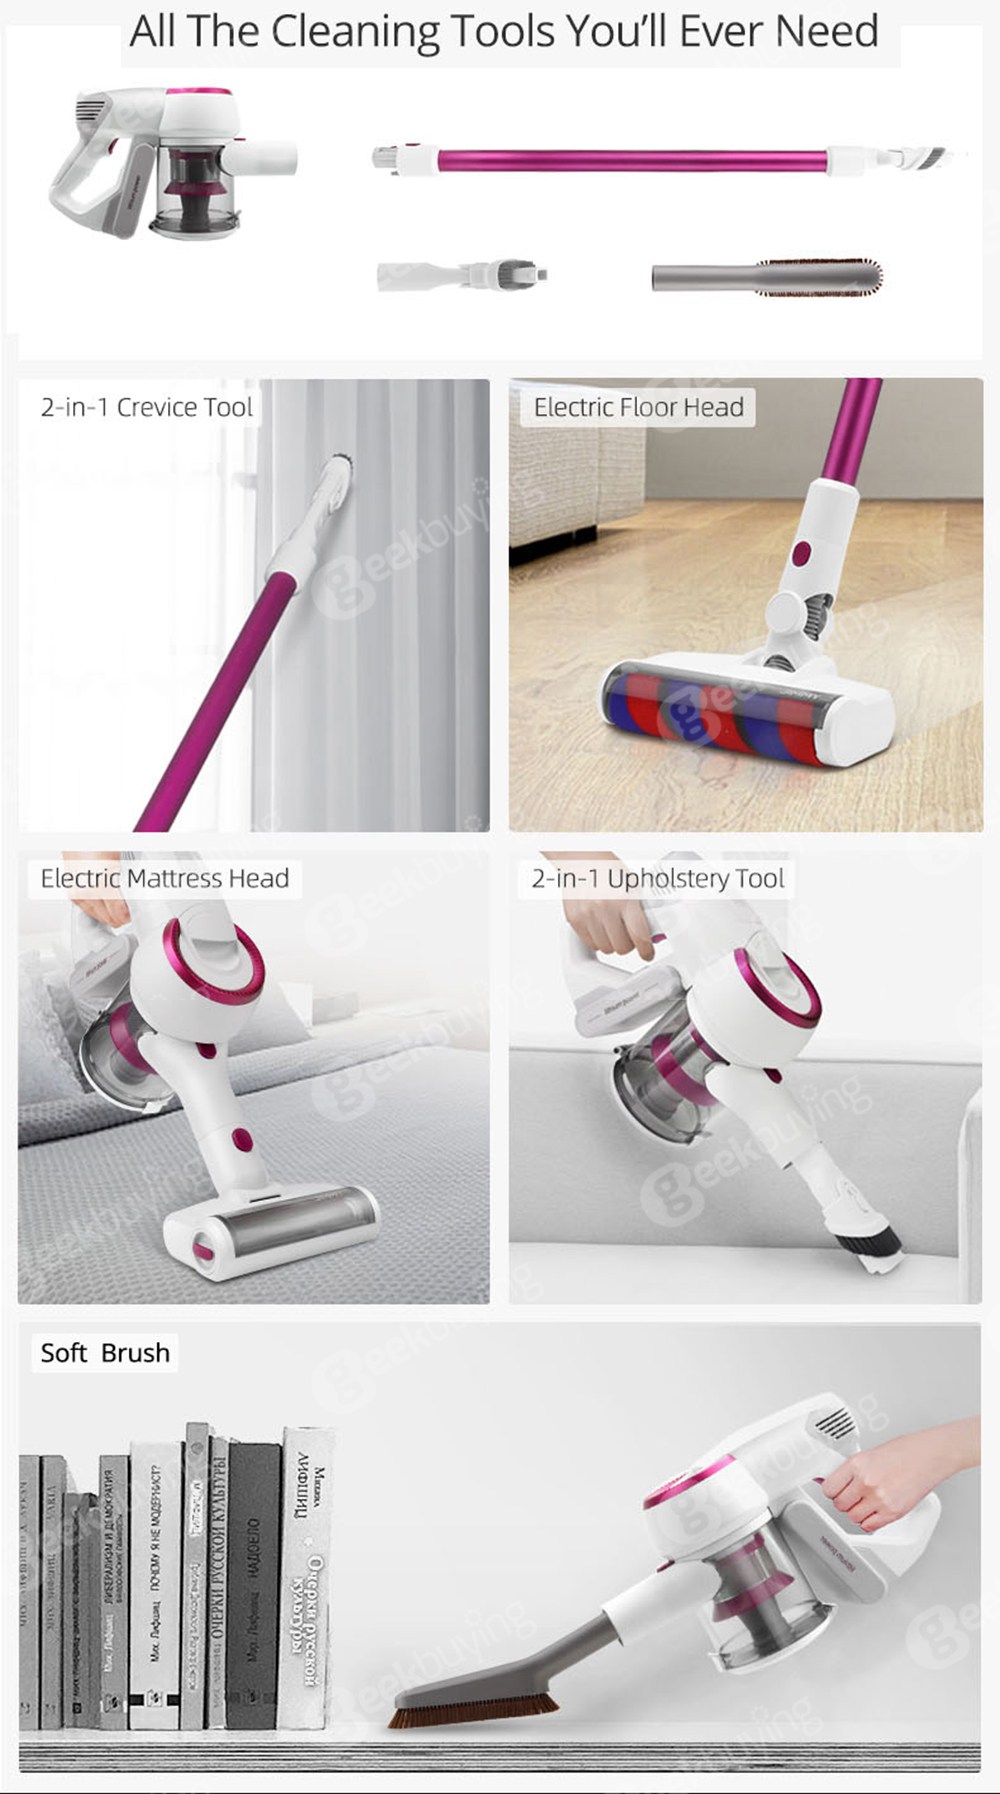 Xiaomi JIMMY JV53 Handheld Cordless Vacuum Cleaner 125AW Powerful Suction High-efficiency Motor Anti-wrapped Brush - Purple